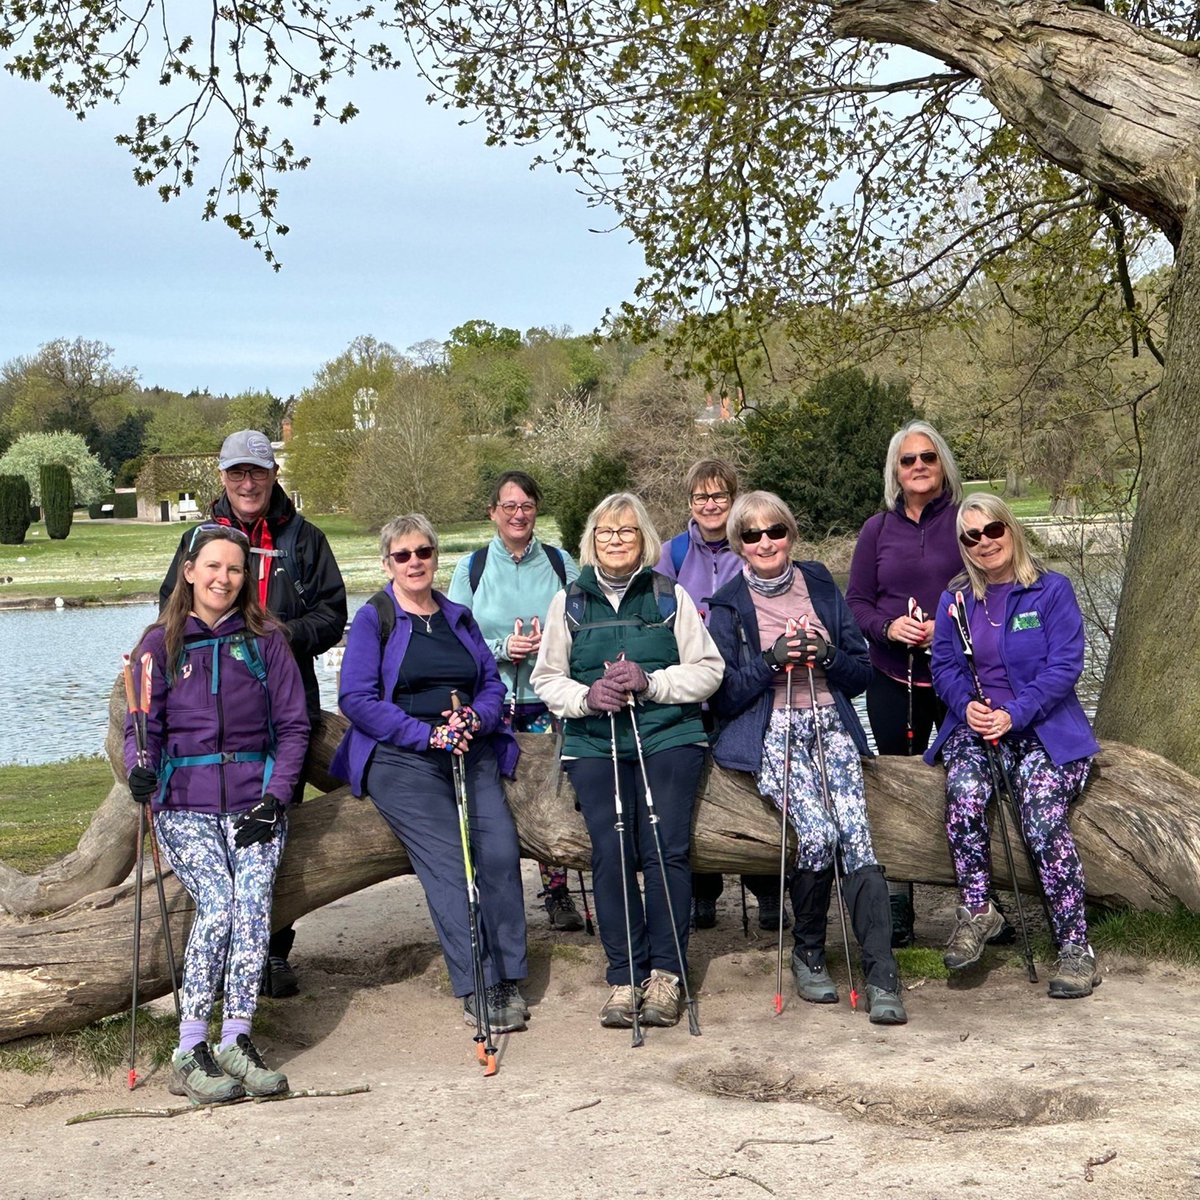 Sherwood Nordic Walking (pictured), as well as all our other walking groups, are all getting involved in #MoveMoreInMay and will be adding their miles to Bassetlaw's grand total. Find out more and sign up at: movemoreinmay.org.uk #ClumberPark